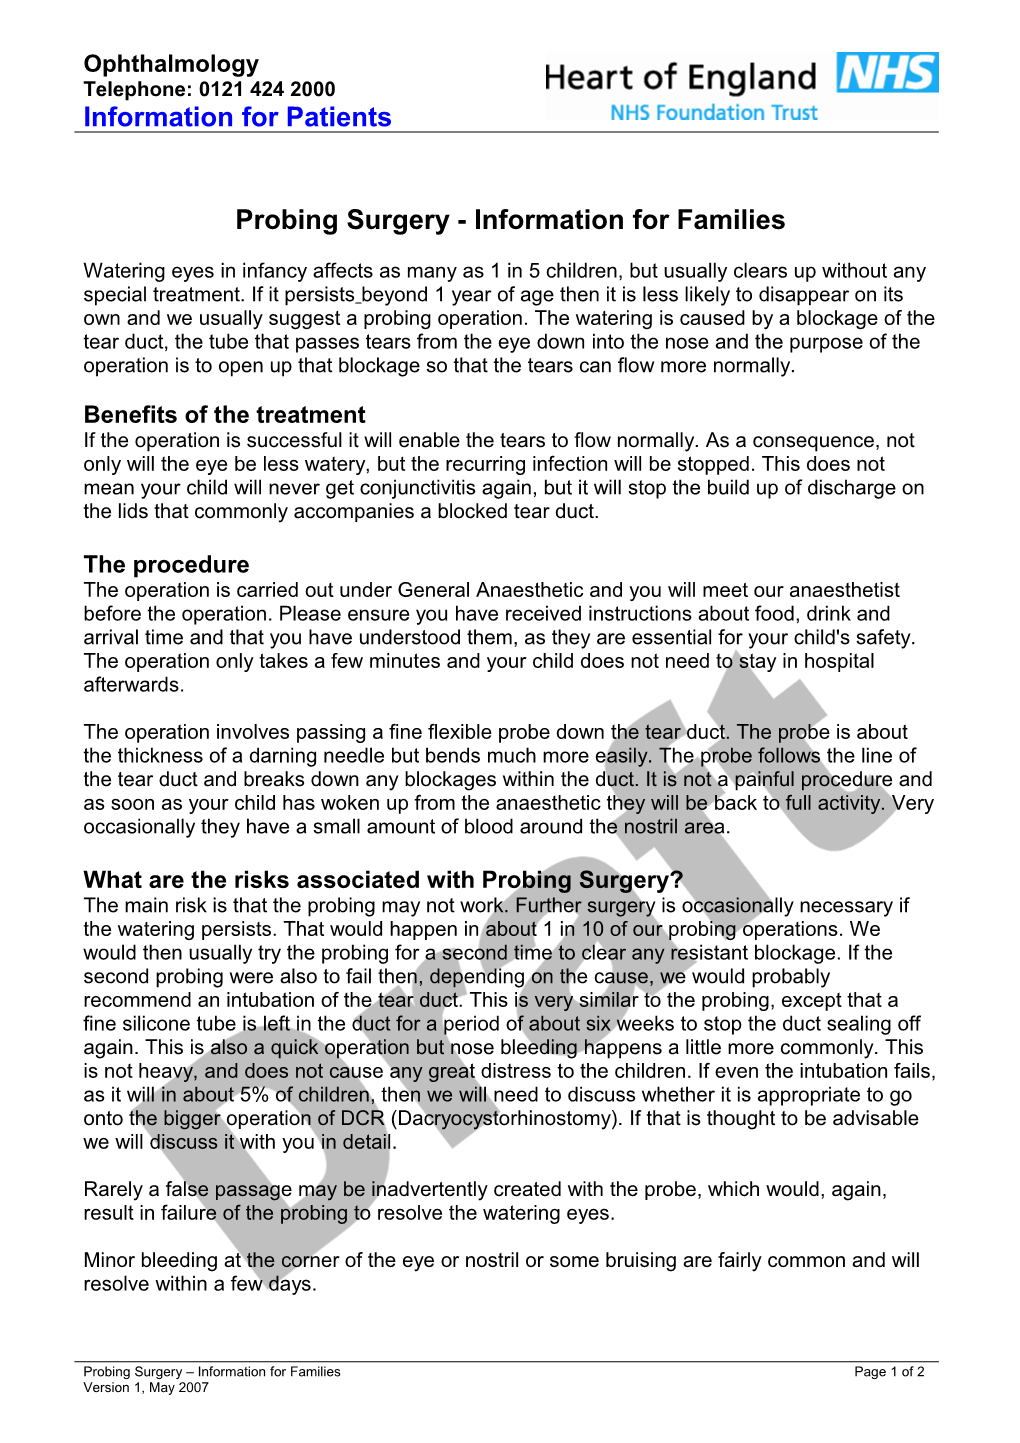 Probing Surgery - Information for Families